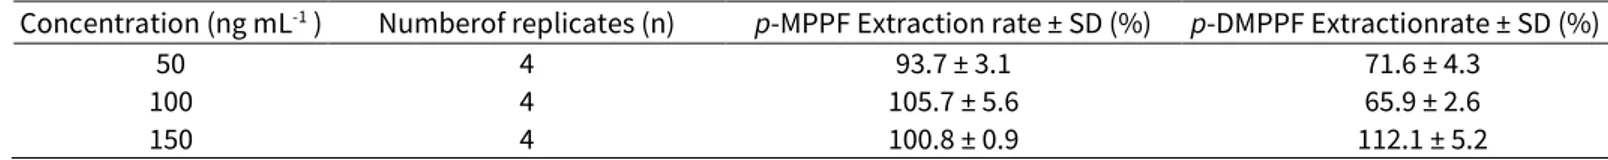 Table 2. Extraction rate obtained for three different concentrations of p-MPPF and p-DMPPF ranging  from 50 to 150 ng mL -1  considering the optimal extraction conditions